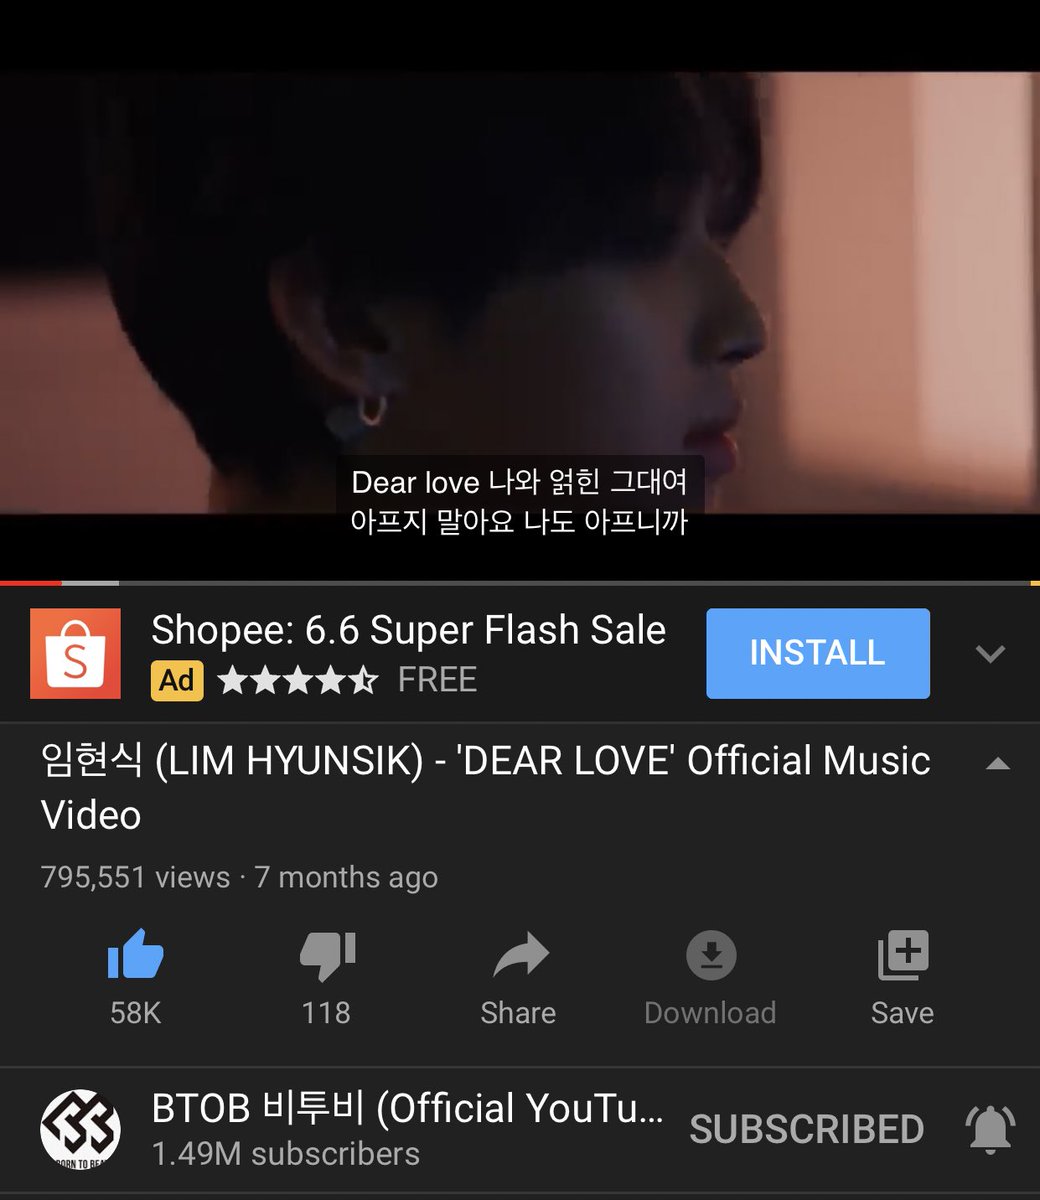 Dear Love view count streaming thread 03JUNE2020 2:33PM KST795,551omo almost 800k 